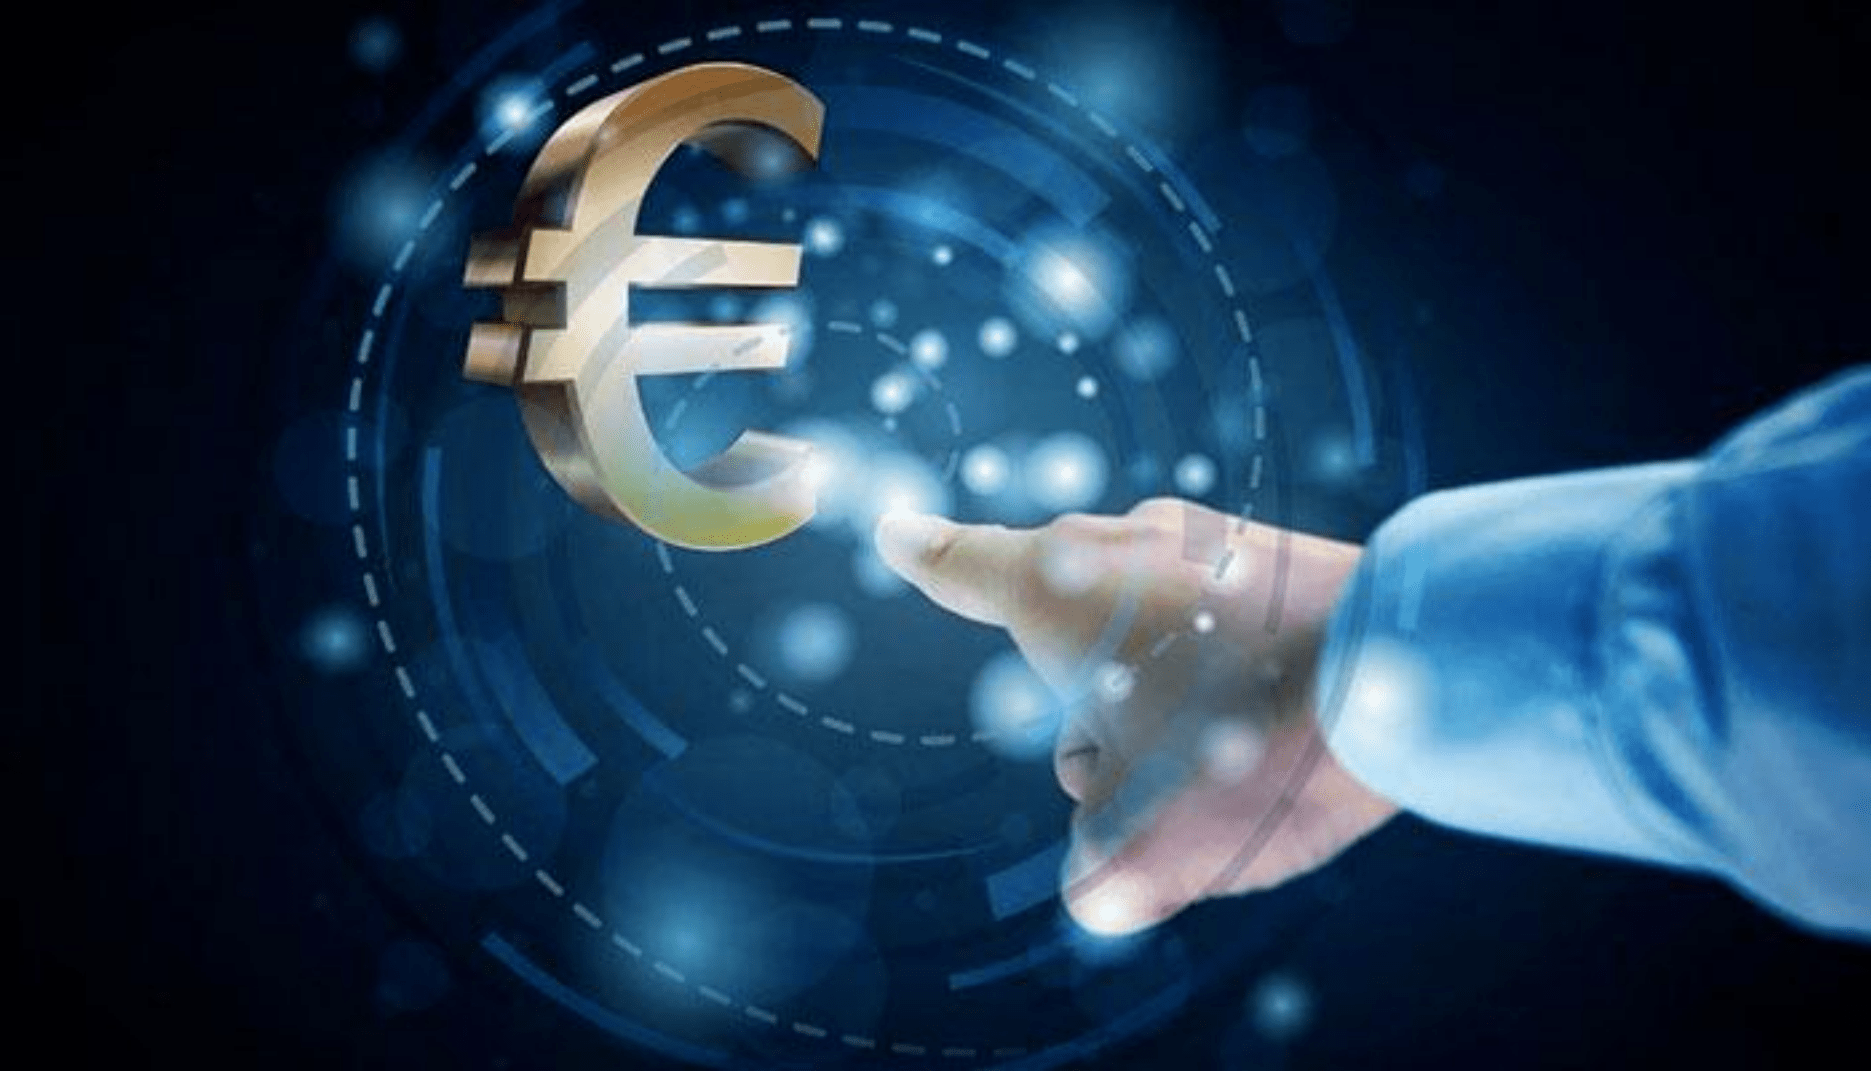 Doomed to Accept The Digital Euro. Are Concerns No Longer Taken Seriously?